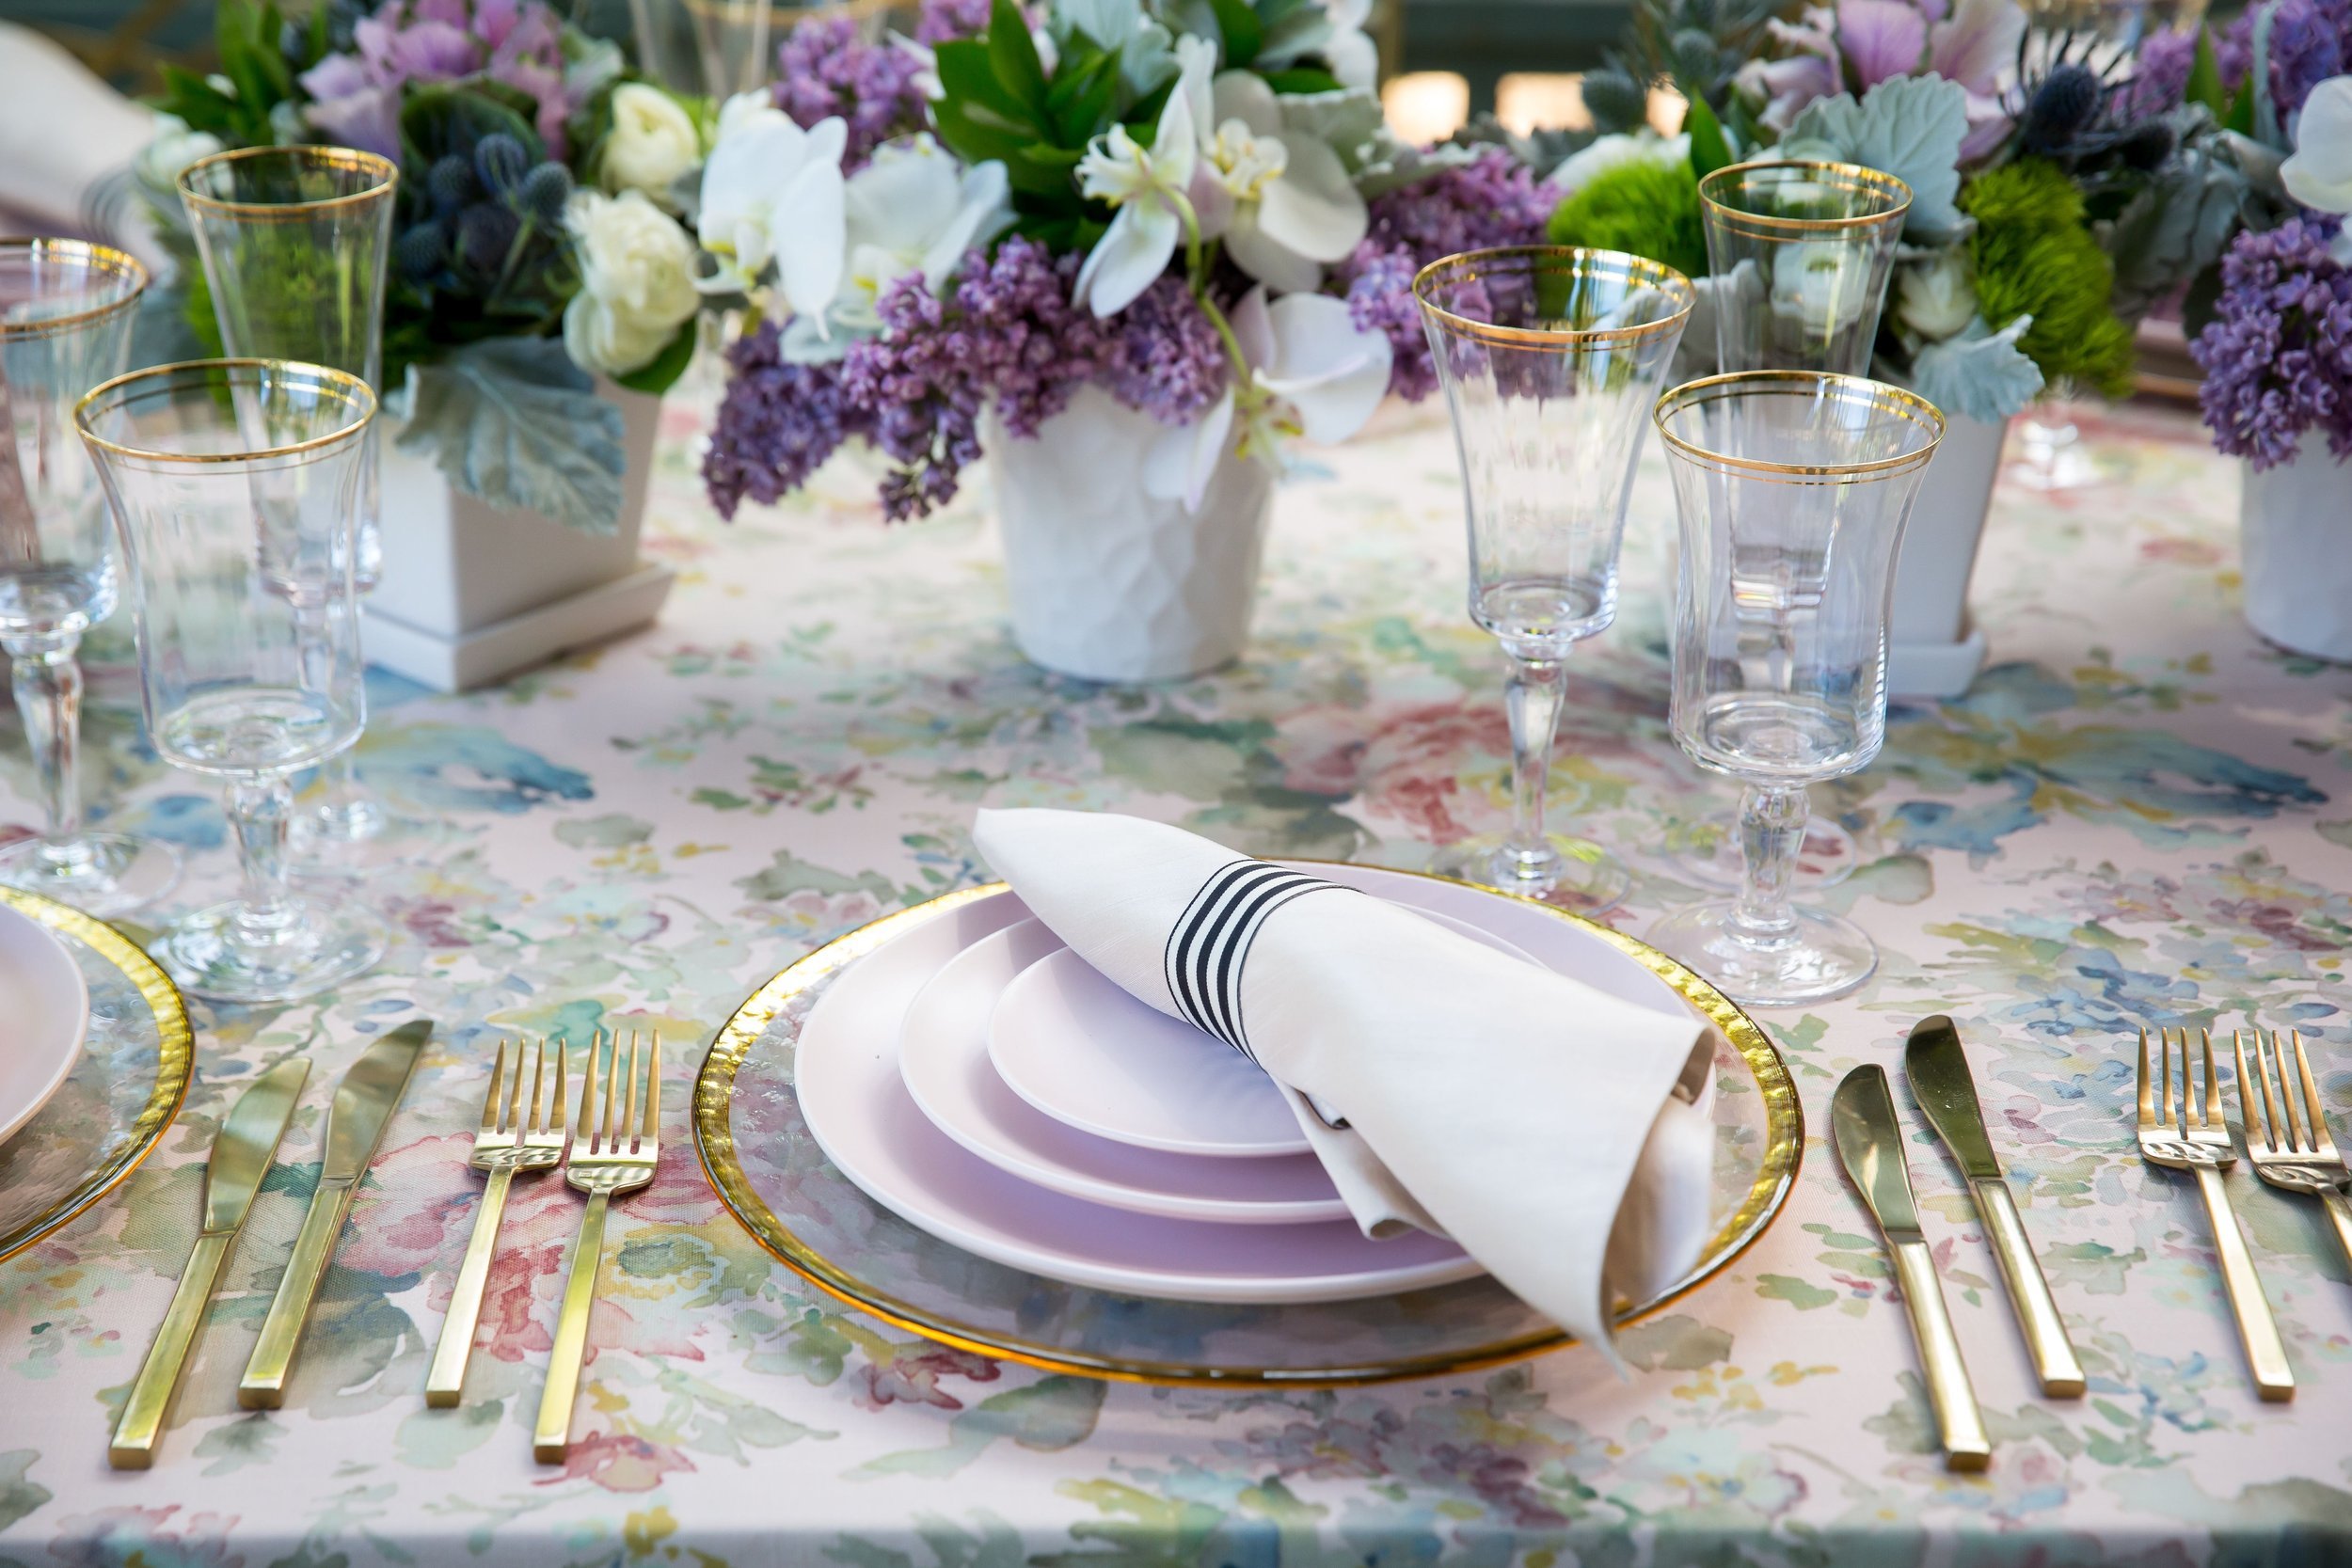 www.santabarbarawedding.com | Bright Event Rentals | Vanity Portrait Studio | Place Setting with Light Purple Plates, Gold Rimmed Glasses, and Purple Florals All on a Floral Tablecloth